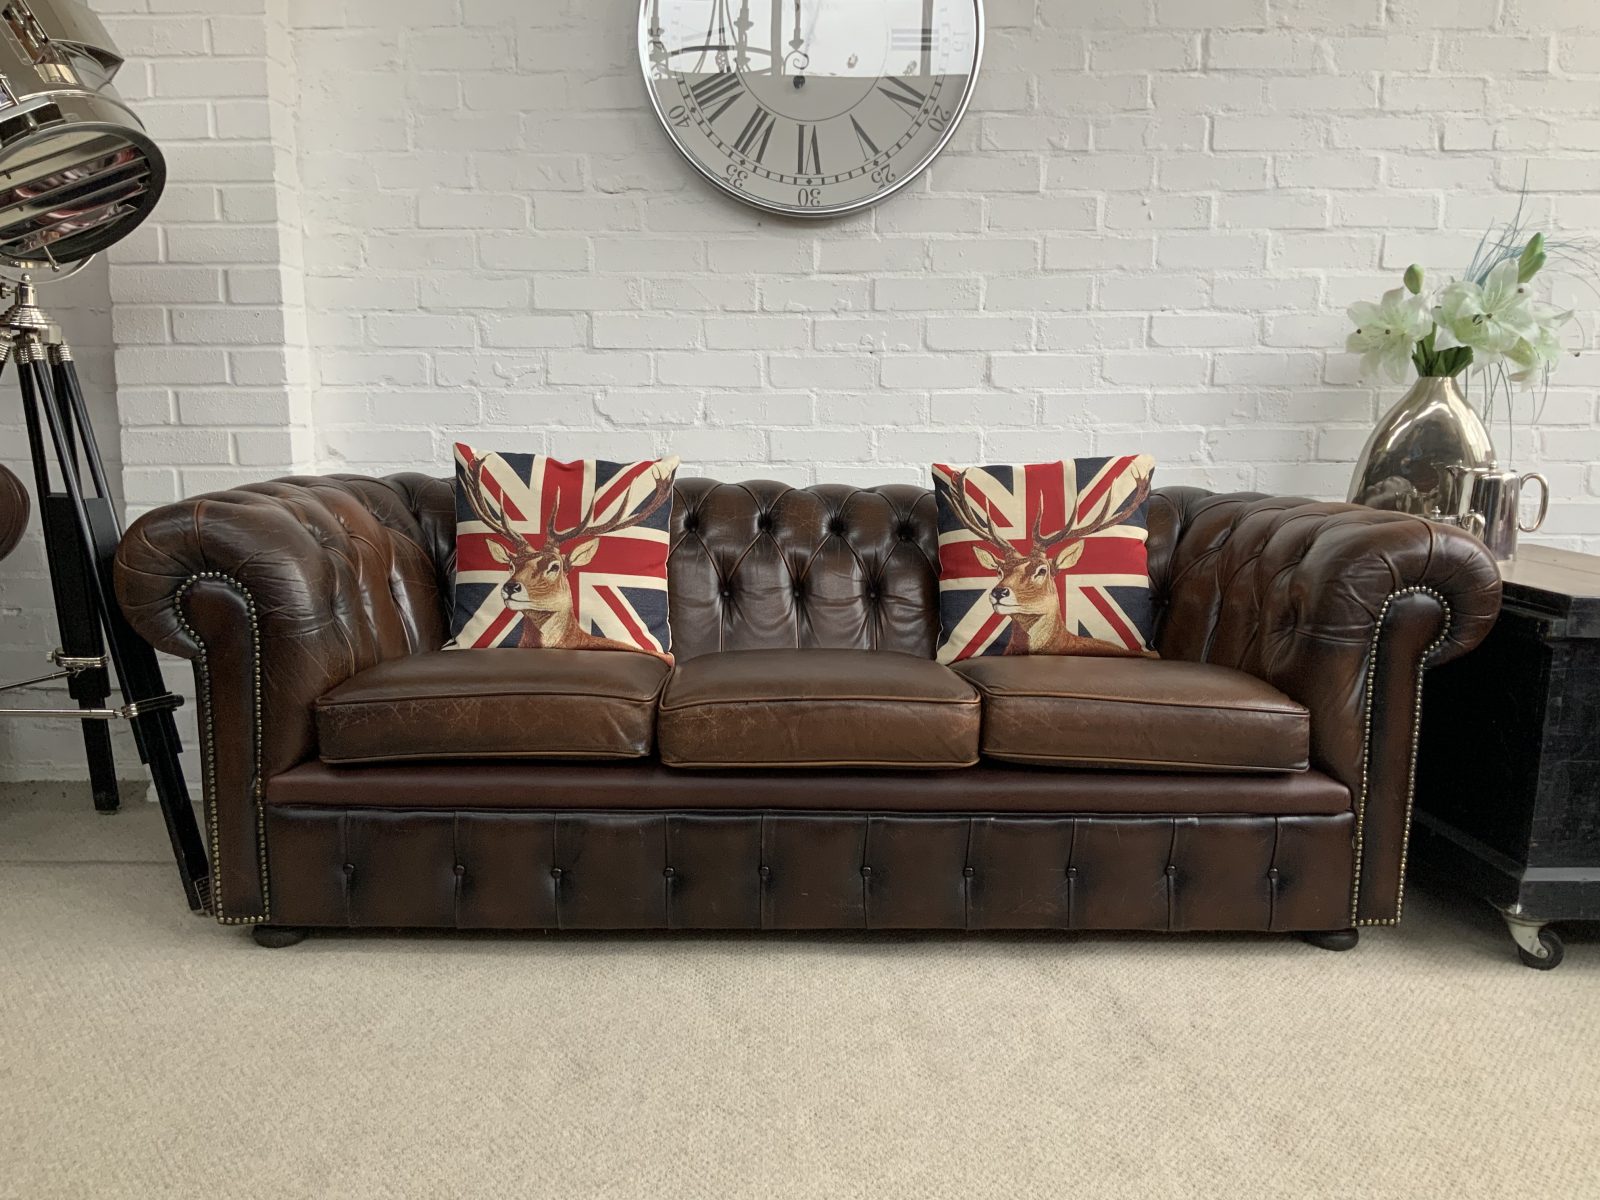 Stunning Vintage Chesterfield Sofa…..SOLD.